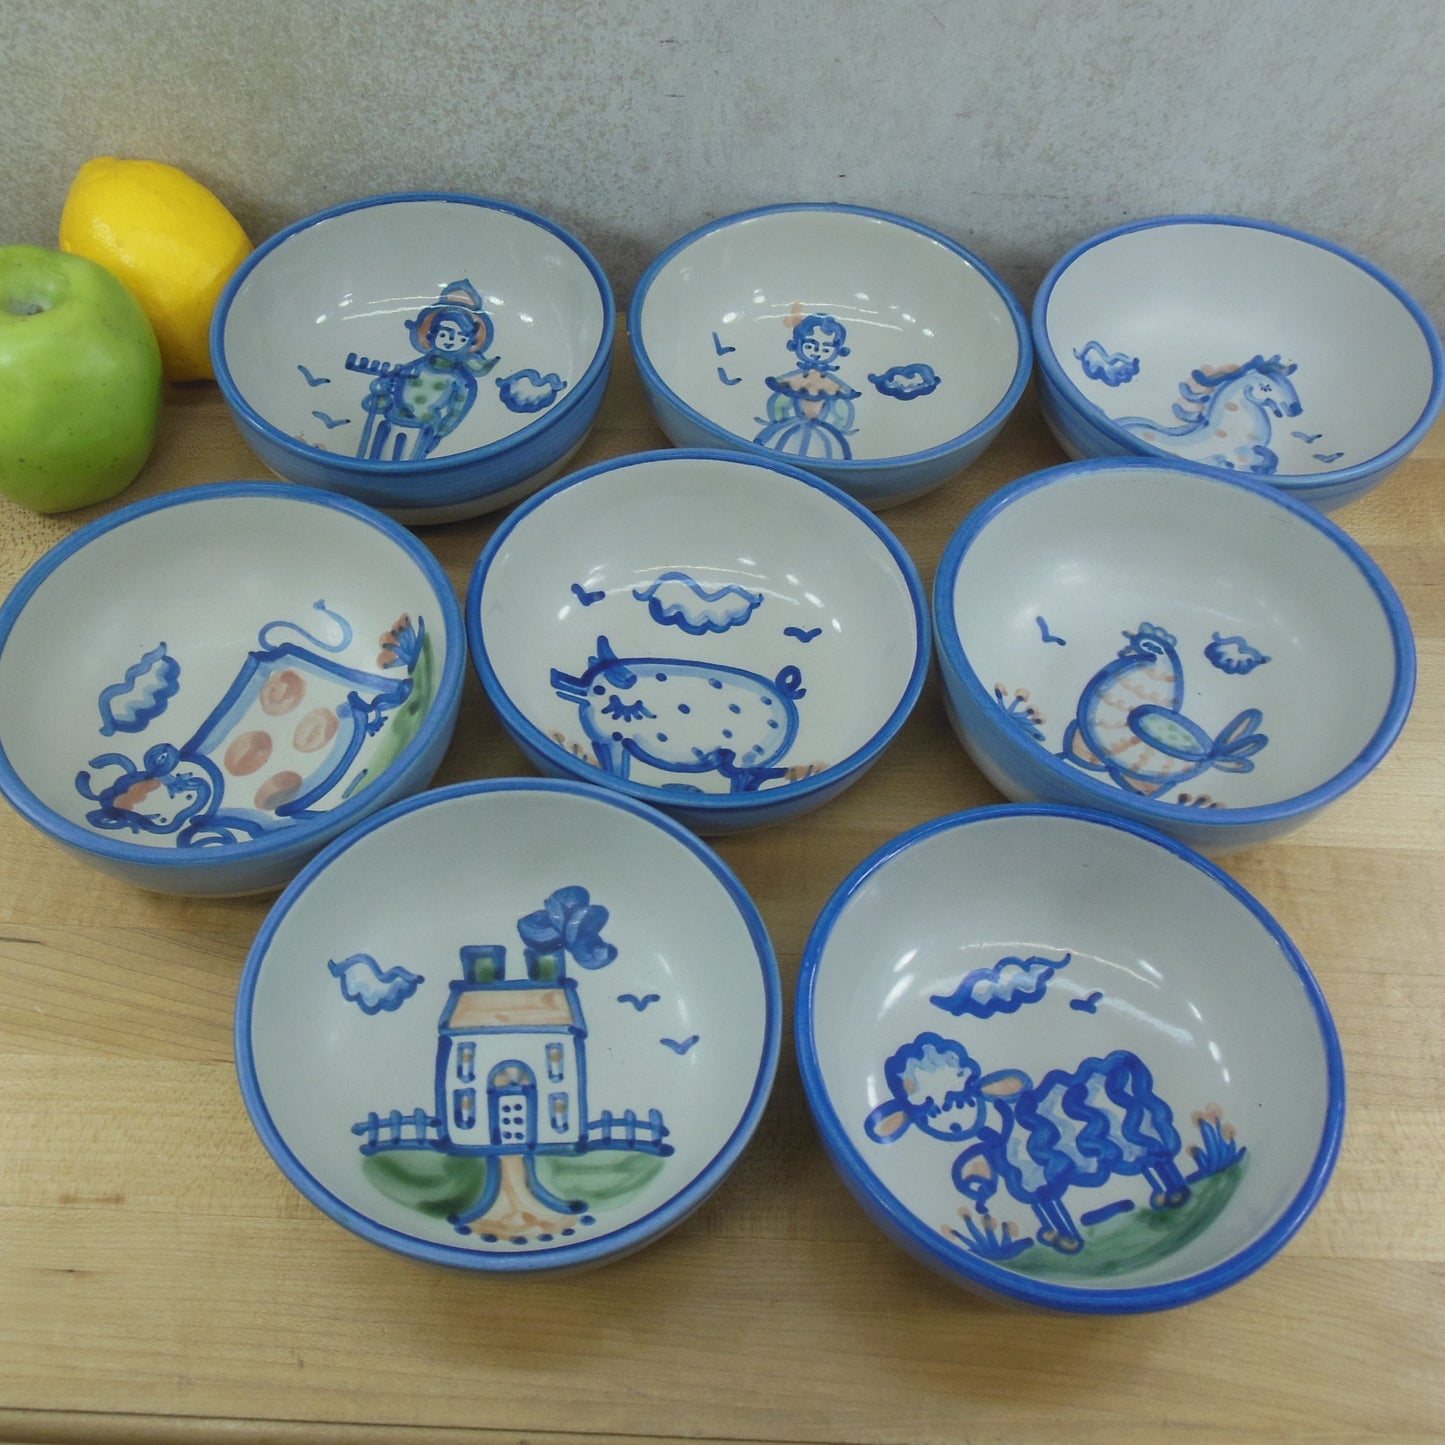 M.A. Hadley Pottery Cereal Bowls Country Farm Animals - 8 Set